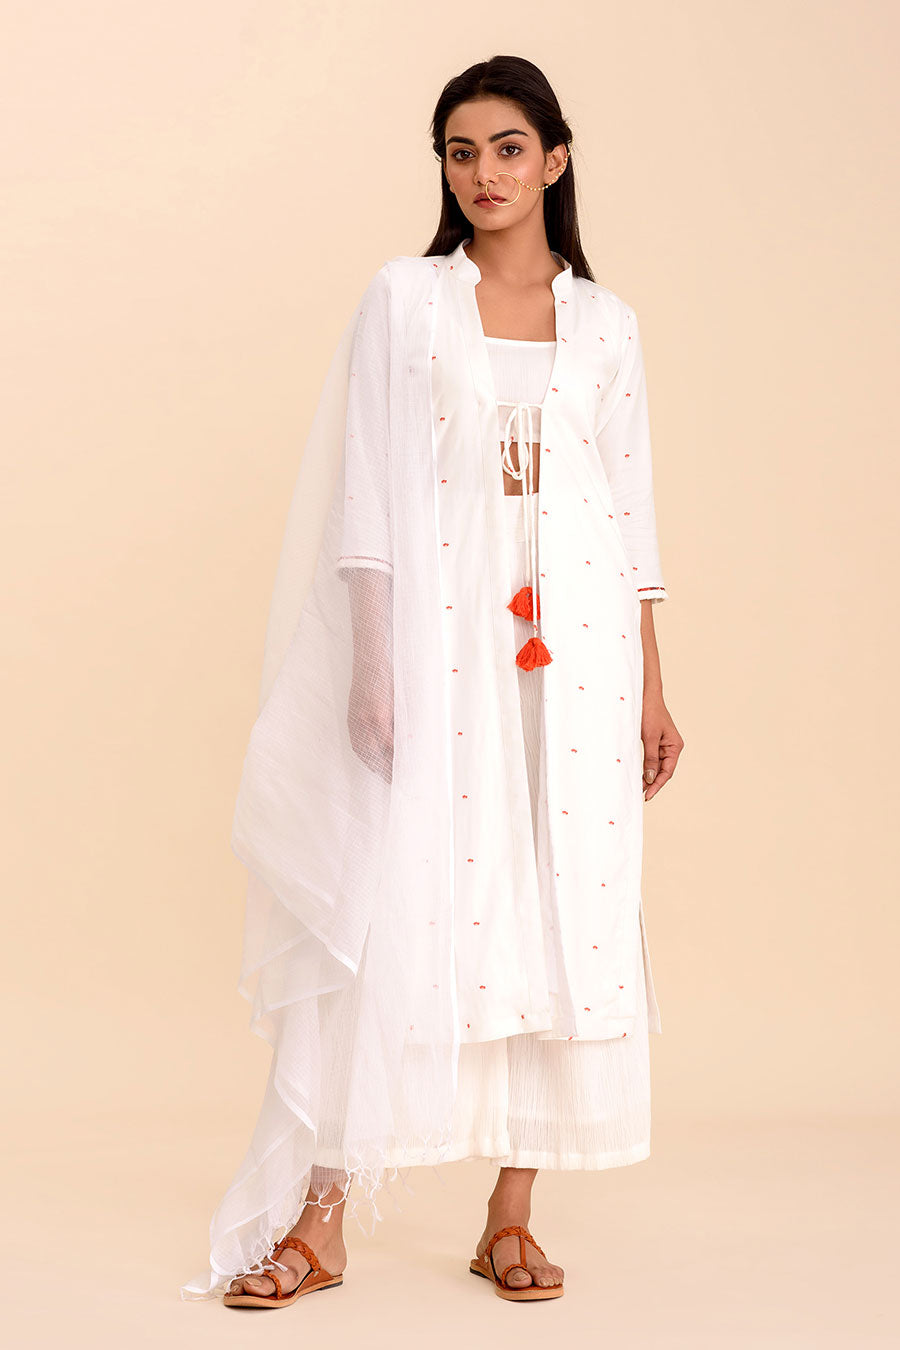 CHAAND - White Co-Ord Set With Dupatta (Set of 4)